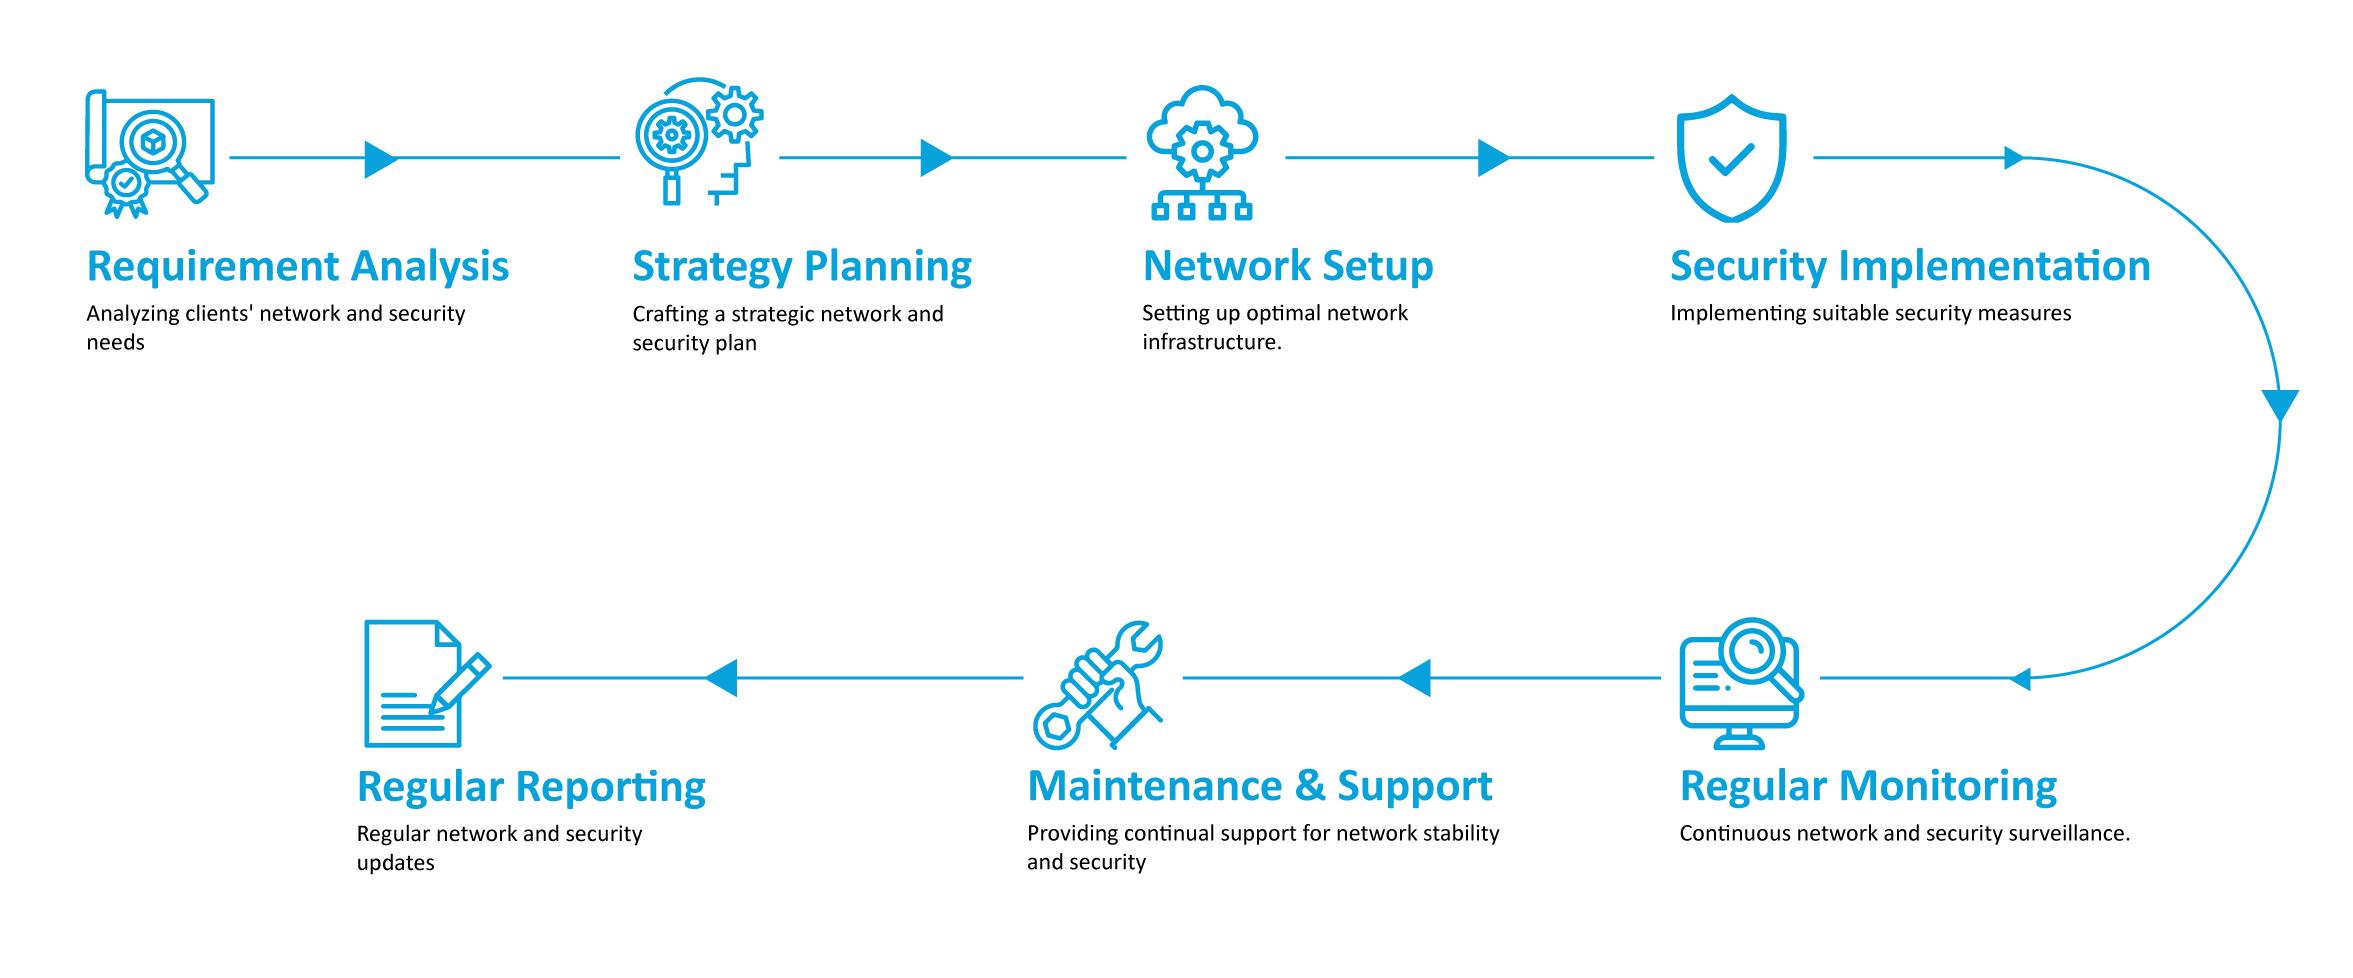 OUR NETWORK & SECURITY PROCESS